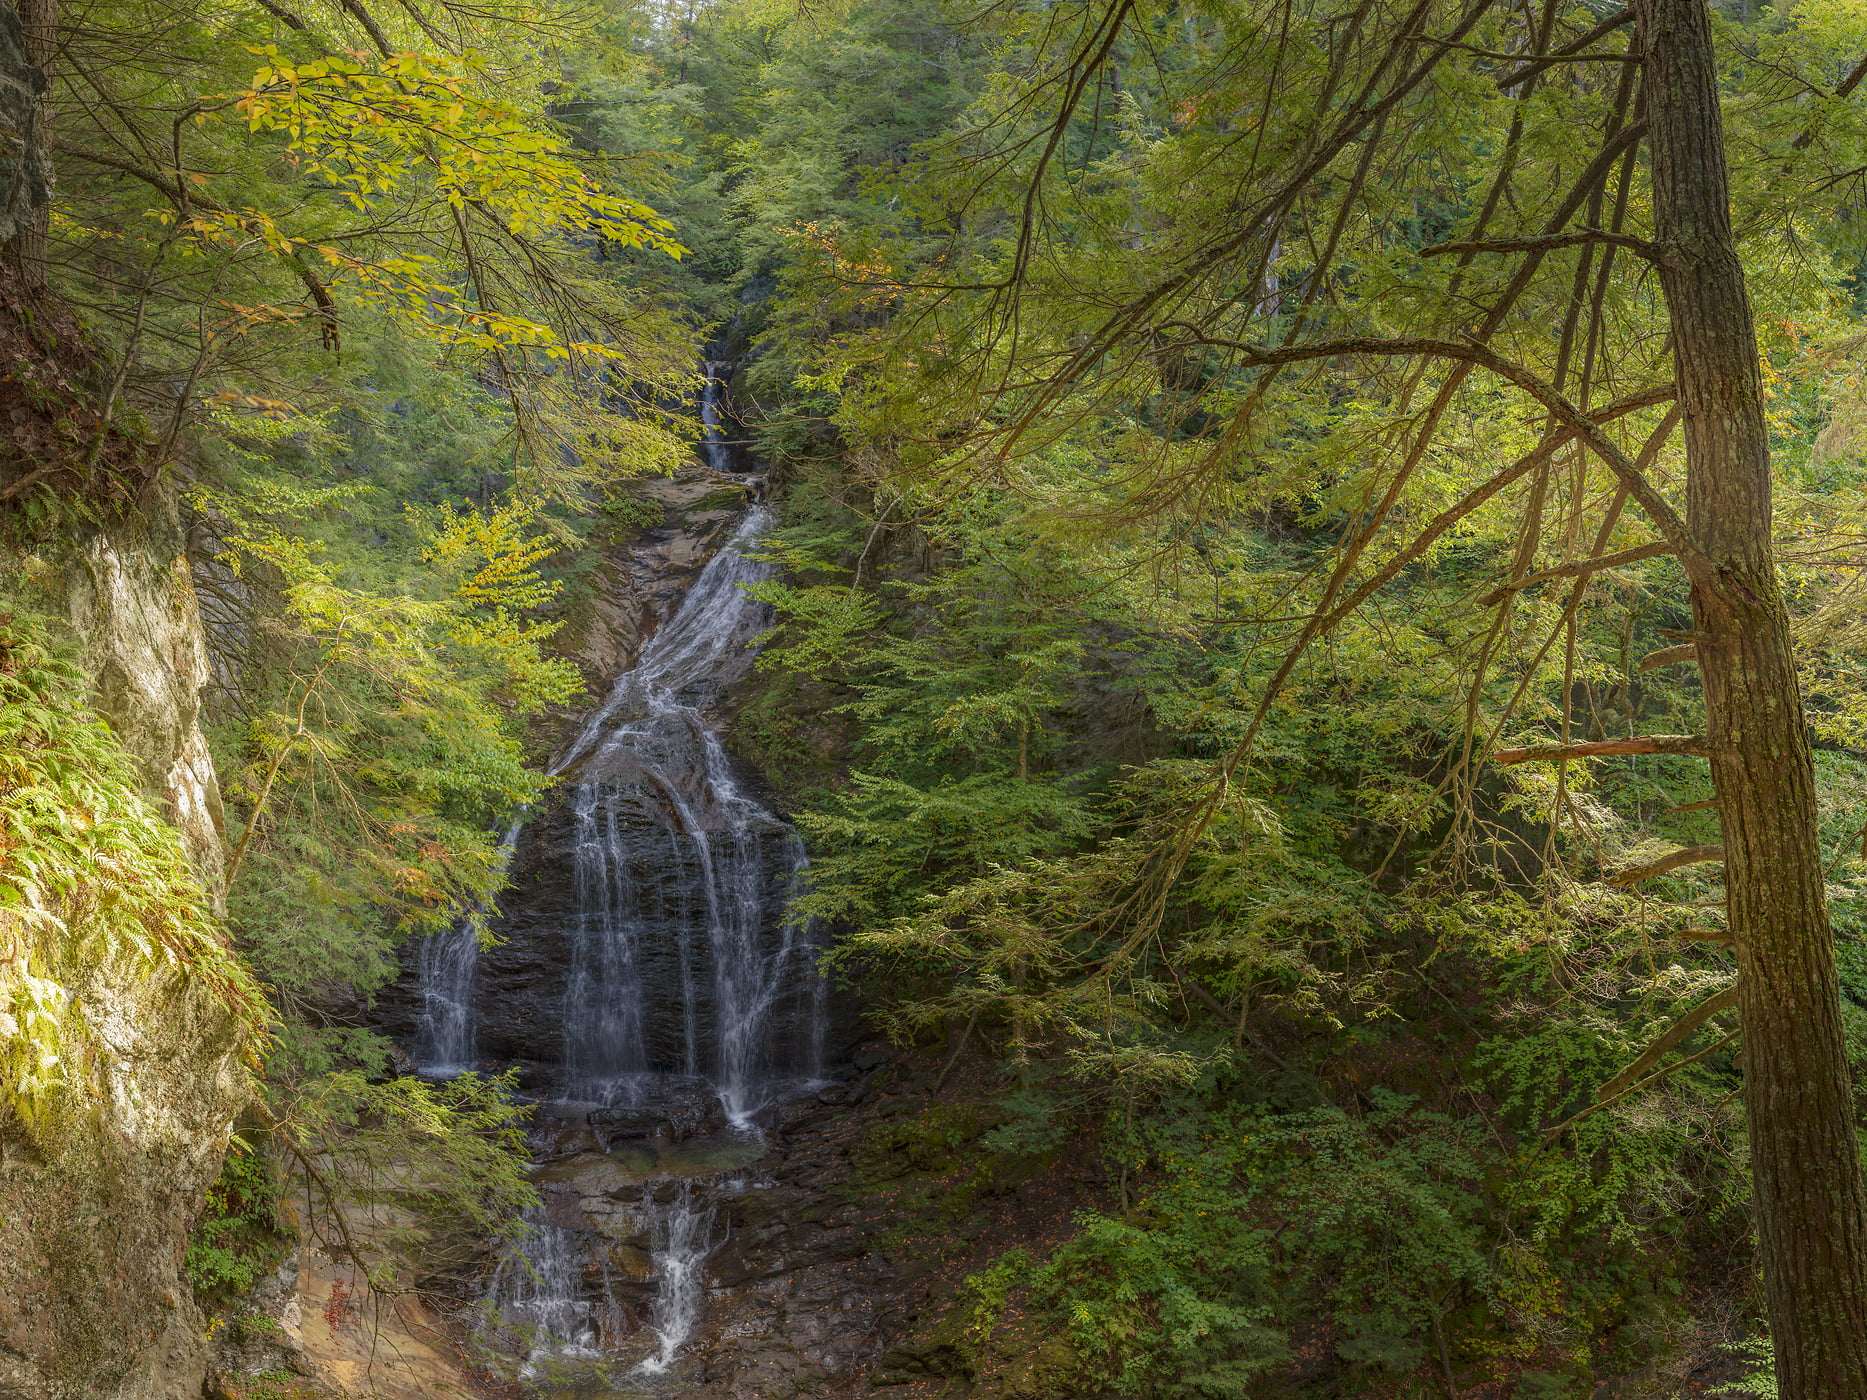 1,106 megapixels! A very high resolution, large-format VAST photo print of a waterfall in the forest; nature photograph created by John Freeman in Moss Glen Falls Rd, Stowe, Vermont.